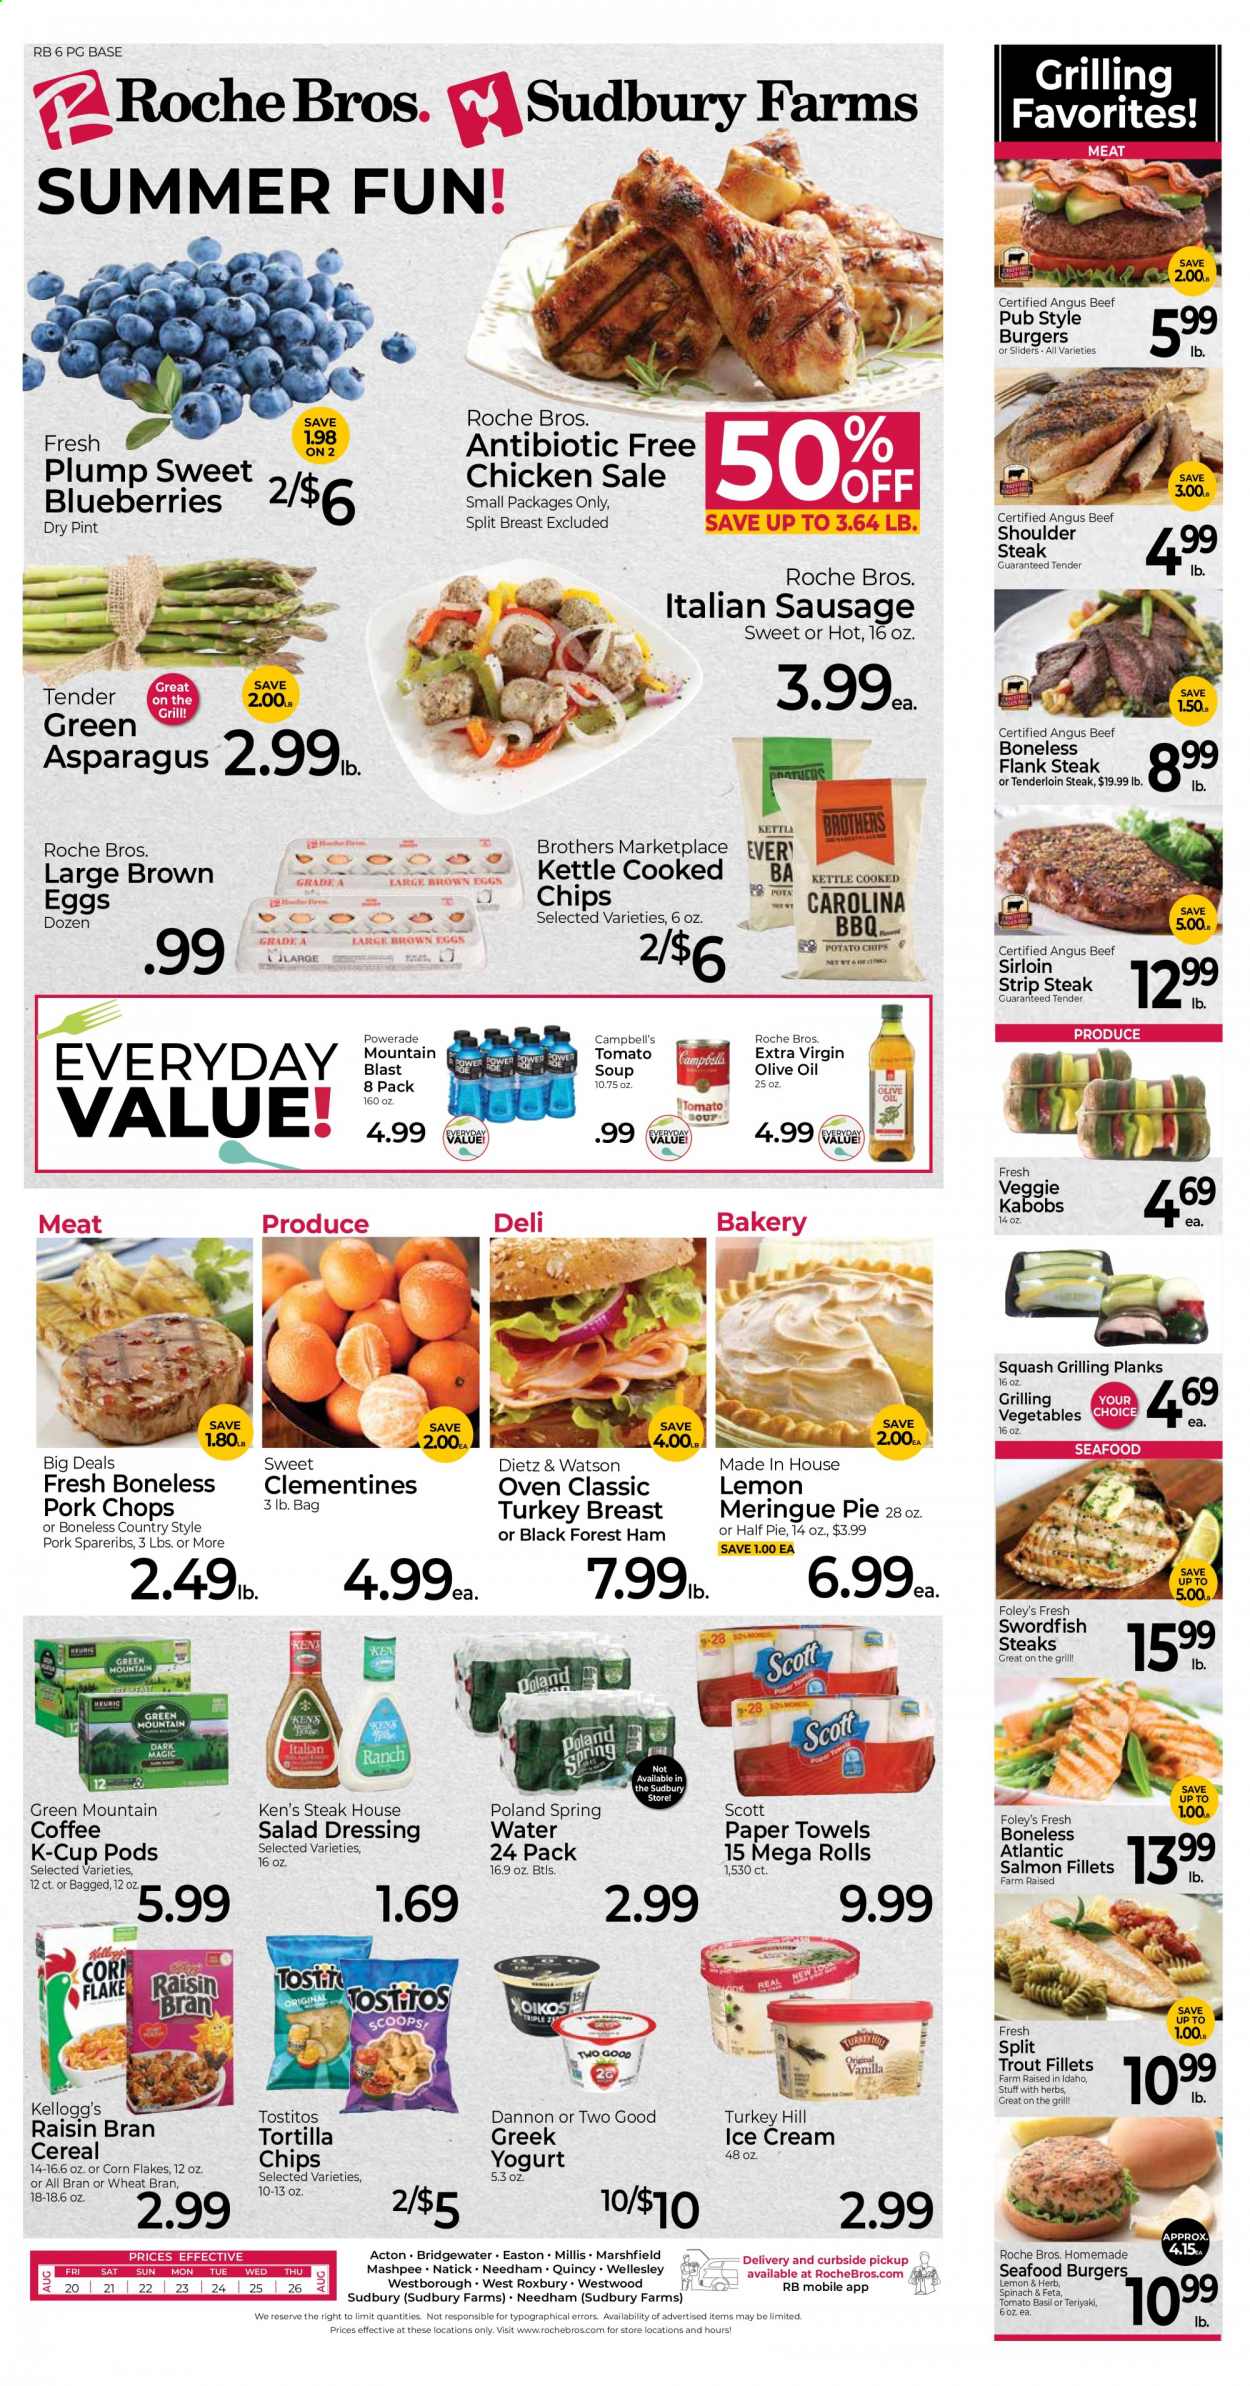 thumbnail - Roche Bros. Flyer - 08/20/2021 - 08/26/2021 - Sales products - pie, asparagus, blueberries, salmon, salmon fillet, swordfish, trout, seafood, Campbell's, tomato soup, soup, hamburger, ham, Dietz & Watson, sausage, italian sausage, greek yoghurt, yoghurt, Dannon, eggs, ice cream, Kellogg's, tortilla chips, chips, Tostitos, cereals, corn flakes, Raisin Bran, All-Bran, esponja, salad dressing, dressing, extra virgin olive oil, olive oil, oil, Powerade, coffee, coffee capsules, K-Cups, Green Mountain, beef meat, beef sirloin, steak, striploin steak, flank steak, pork chops, pork meat, pork spare ribs, Scott, kitchen towels, paper towels, clementines. Page 1.